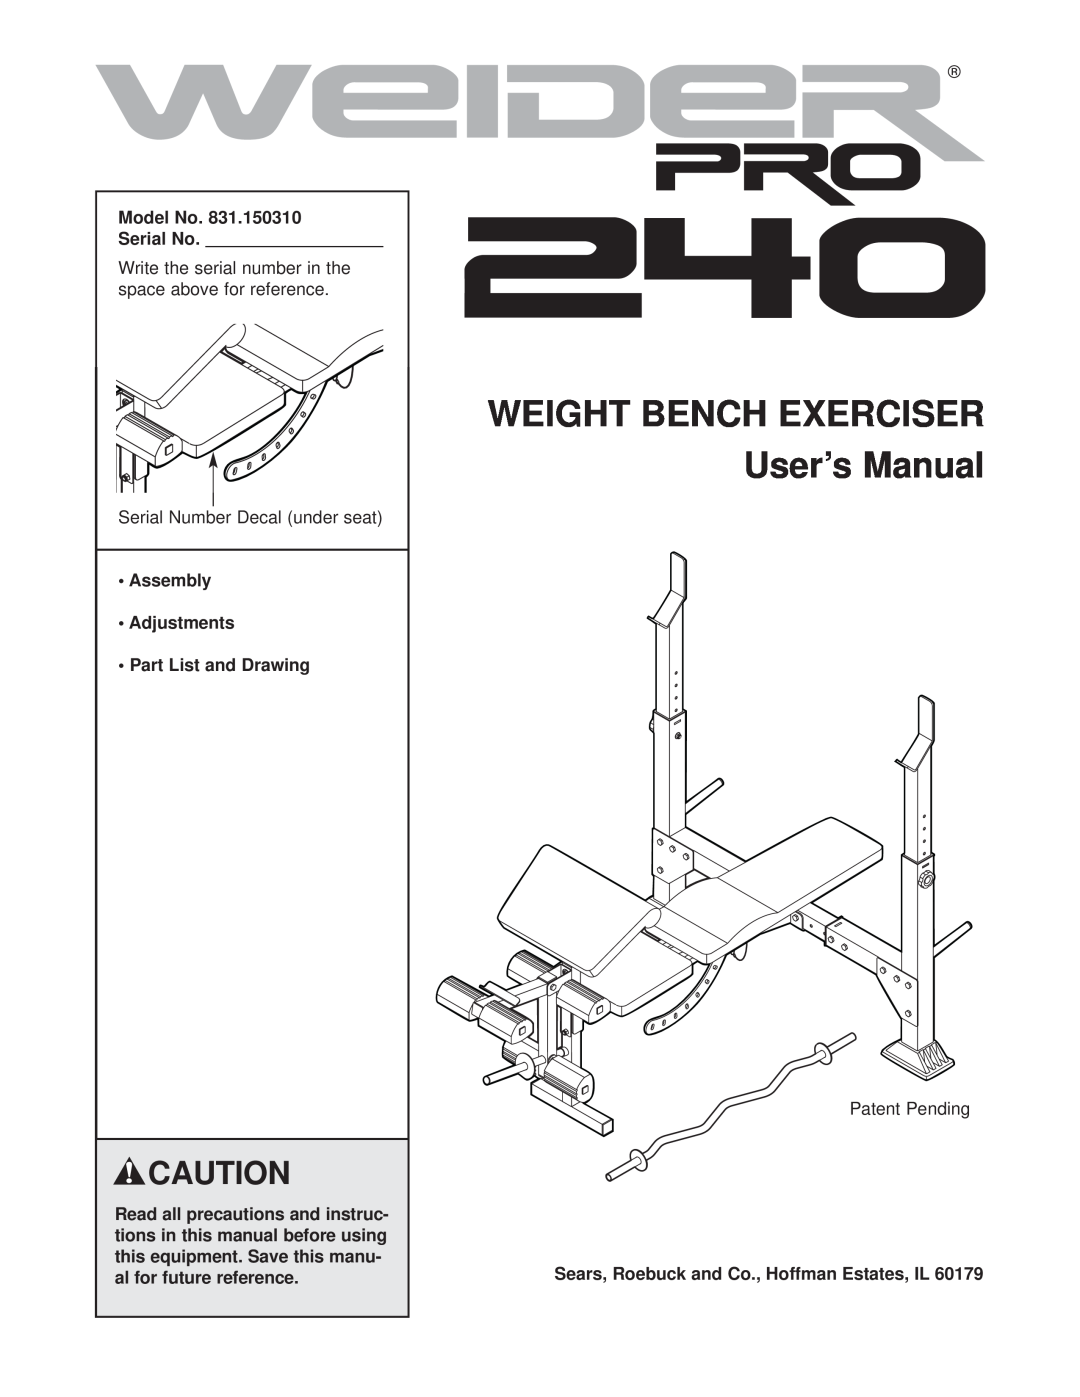 Weider 831.150310 user manual WEIGHT BENCH EXERCISER User’s Manual, Model No Serial No 